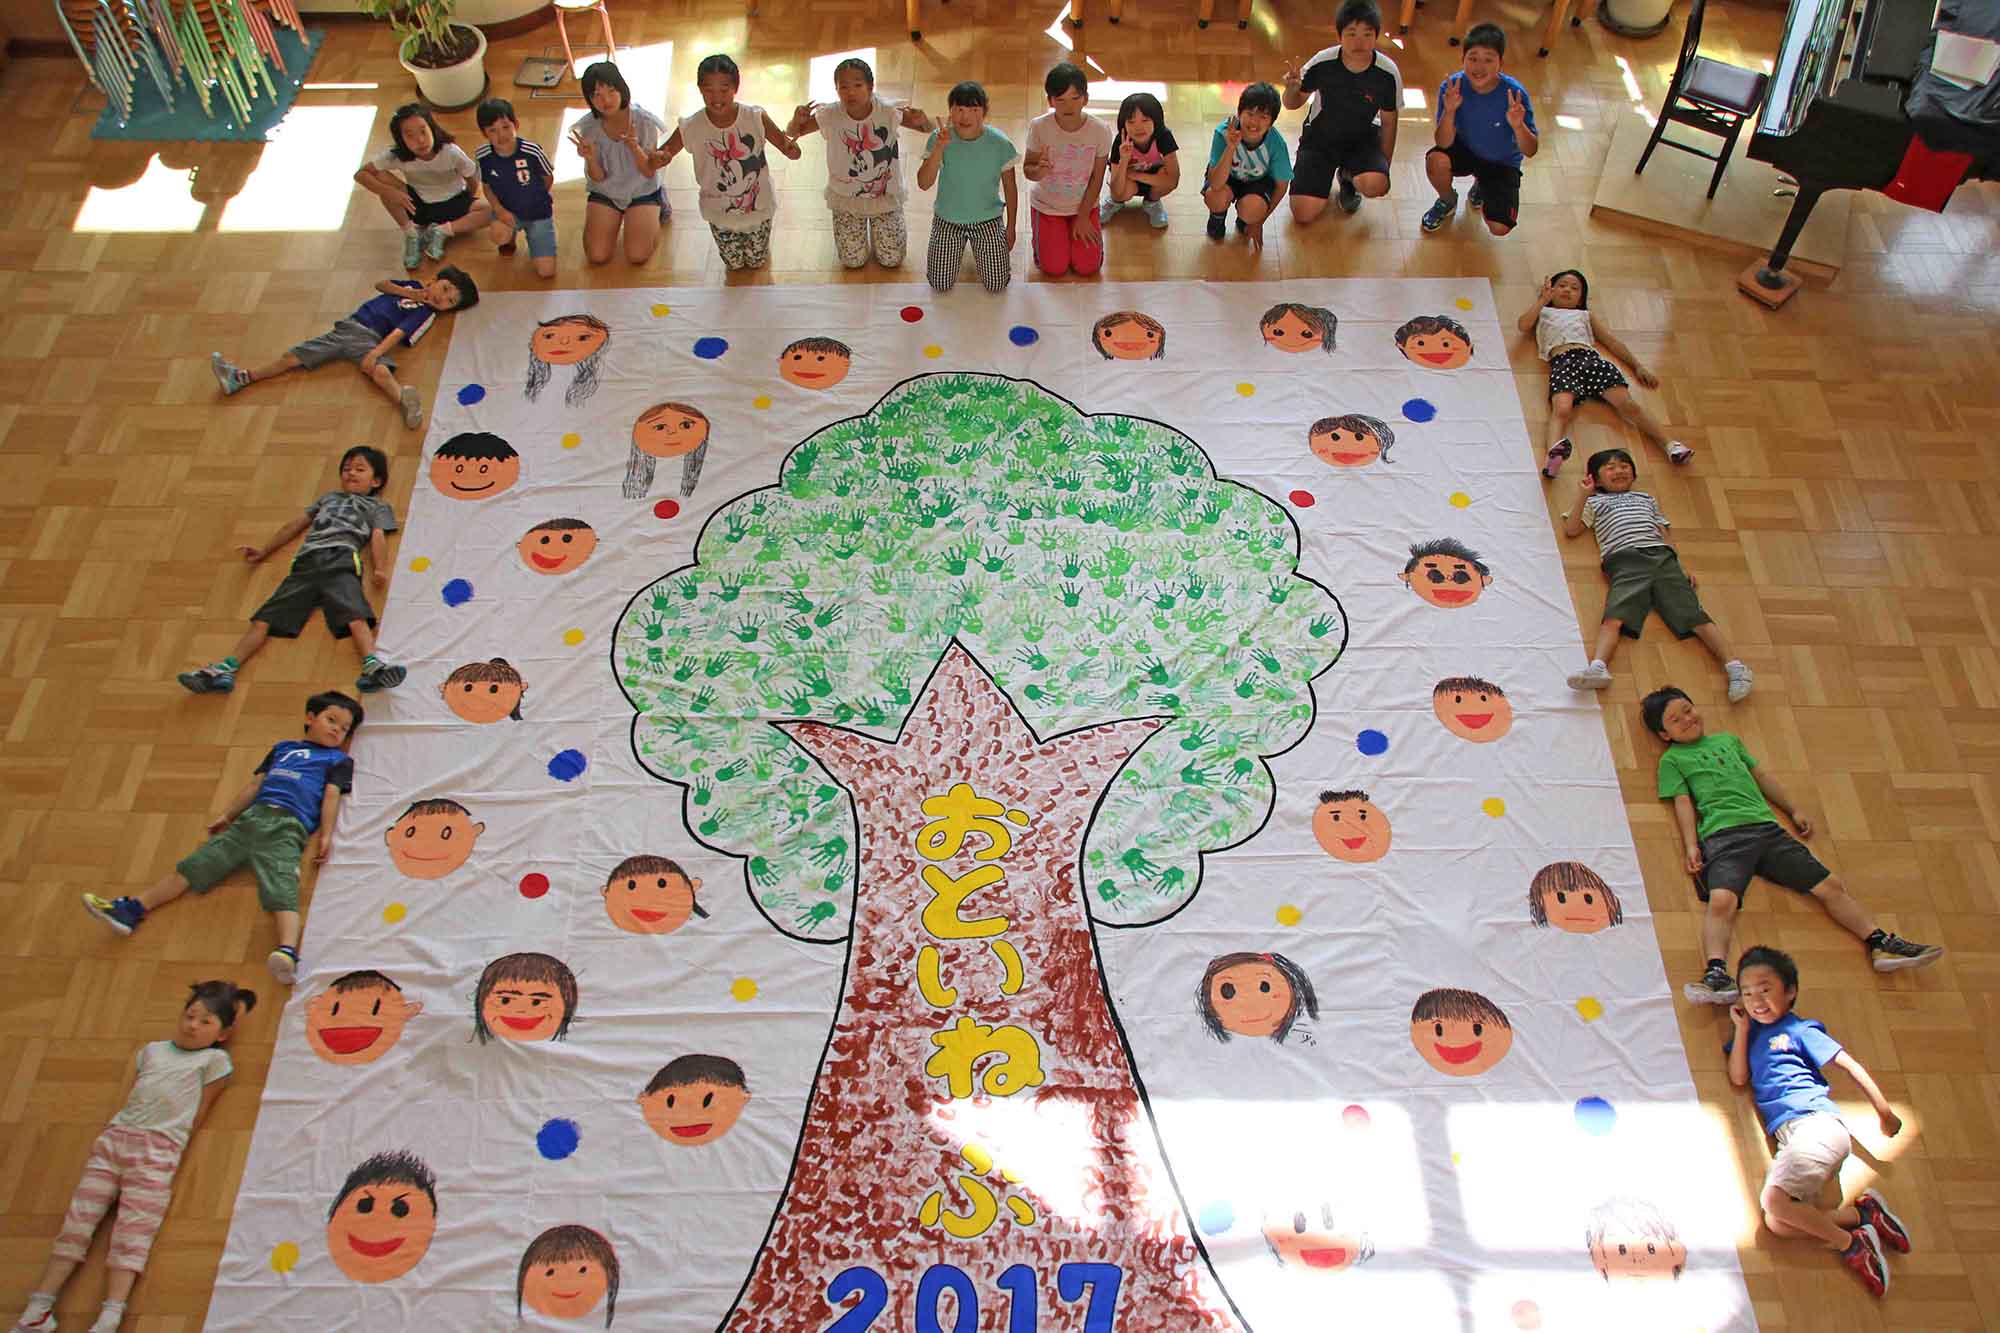 The Biggest Painting in the World 2020 Otoineppu Village was completed 